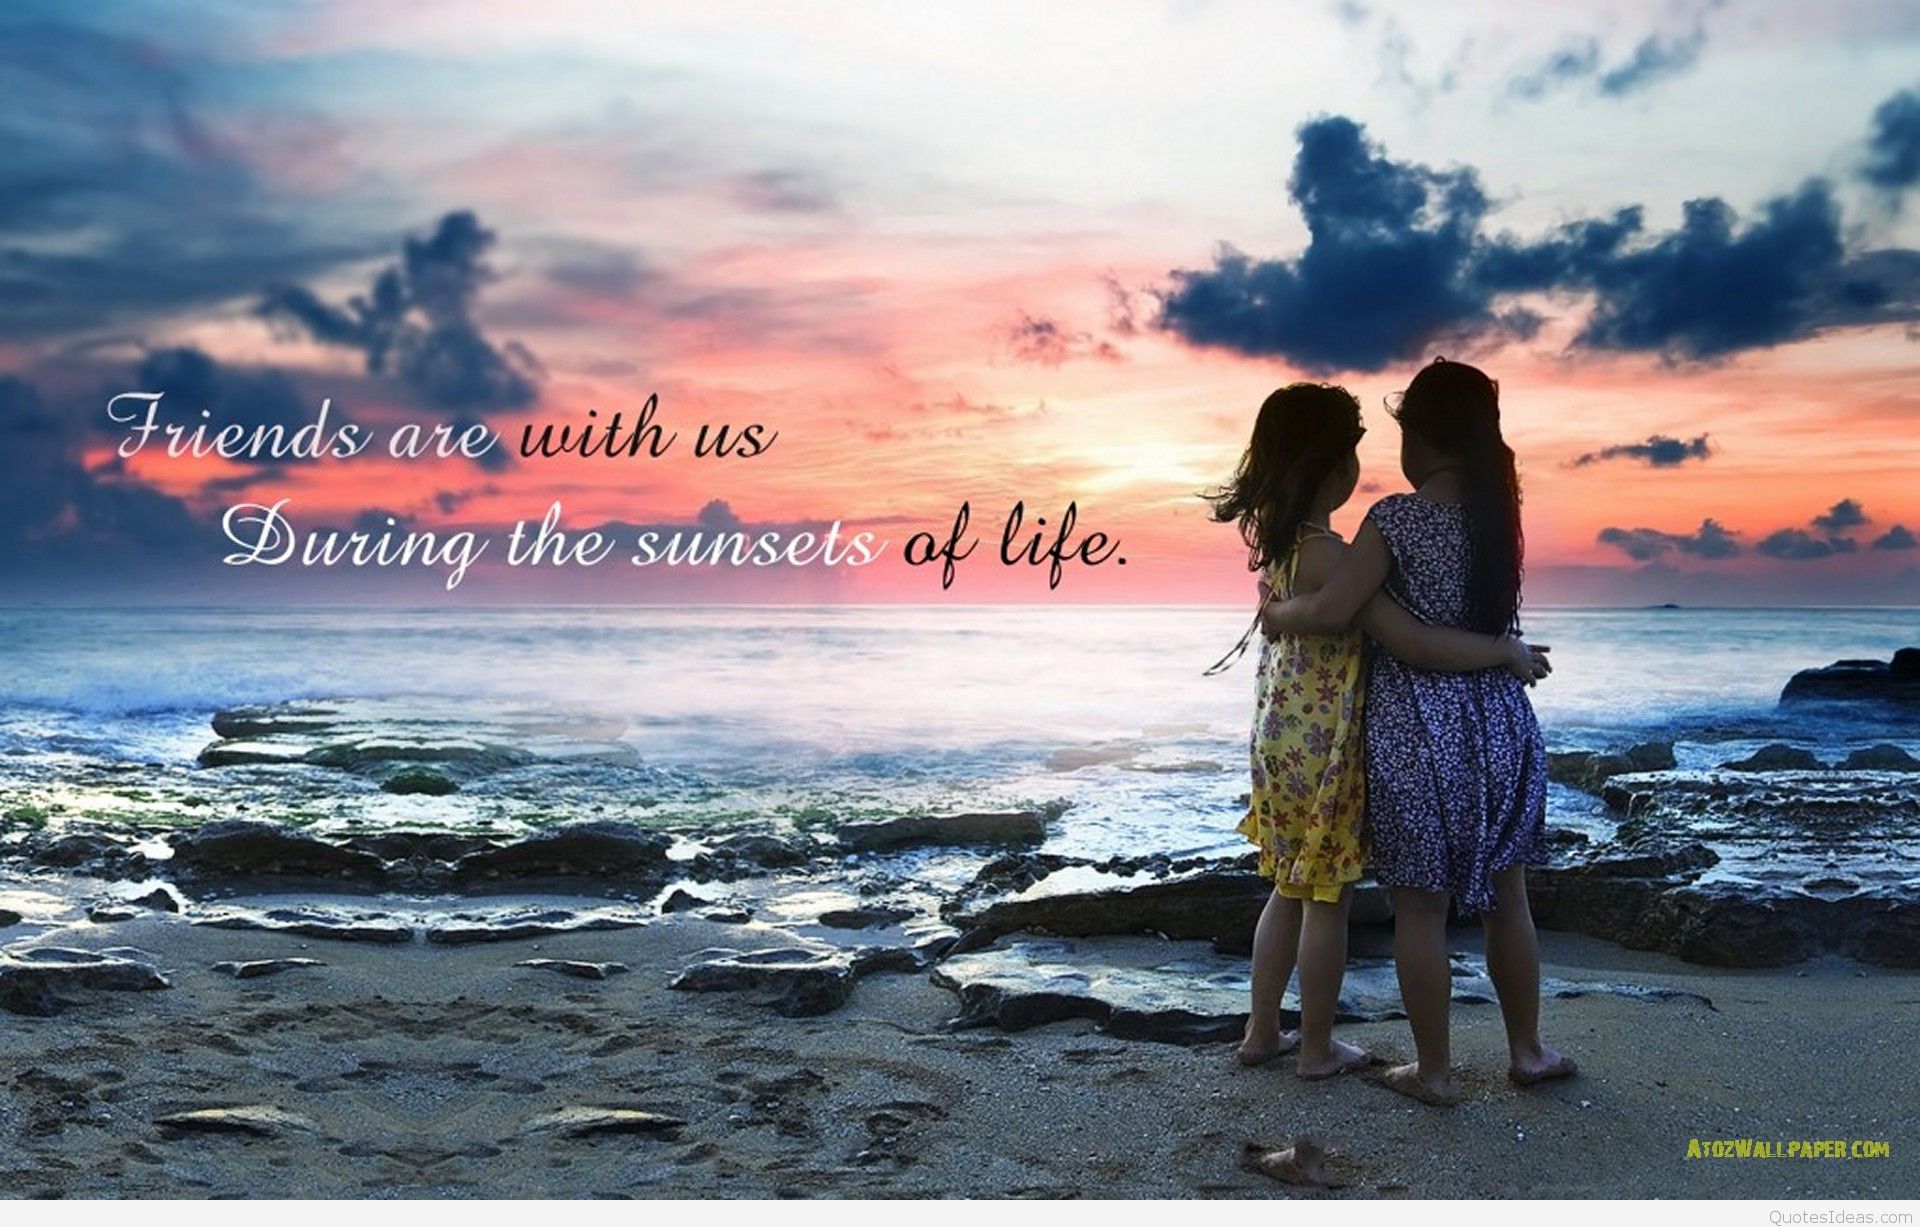 Best Friendship Wallpaper With Quote